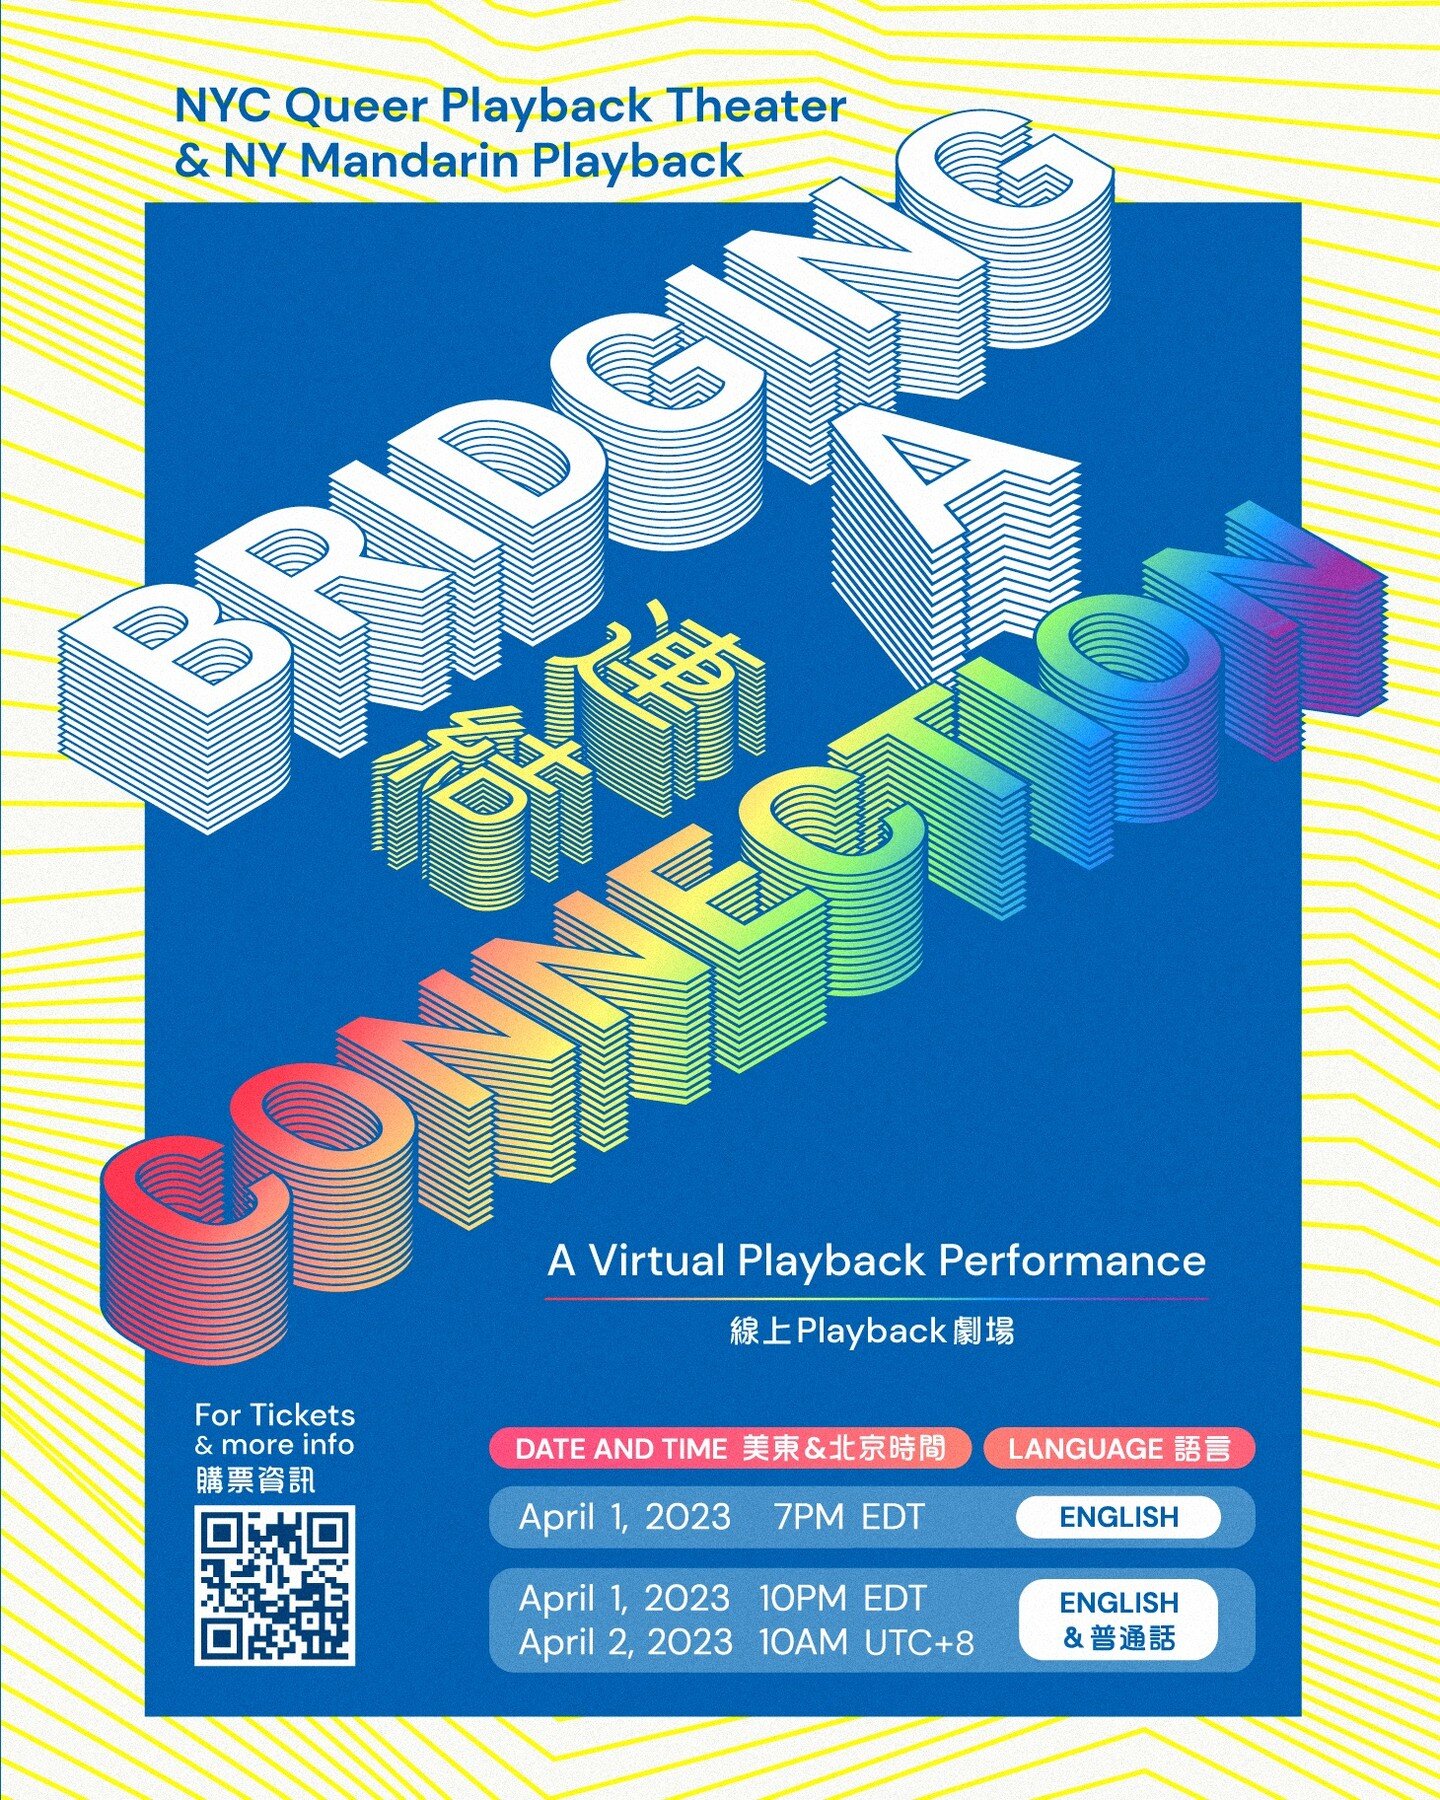 Our NYC Queer Playback ensemble is so excited to pair with @NYMplayback in a virtual, interactive playback performance to share personal stories around &ldquo;Bridging A Connection&rdquo;!

Two virtual shows on Sat. April 1:
- 7 PM EDT in English 
- 